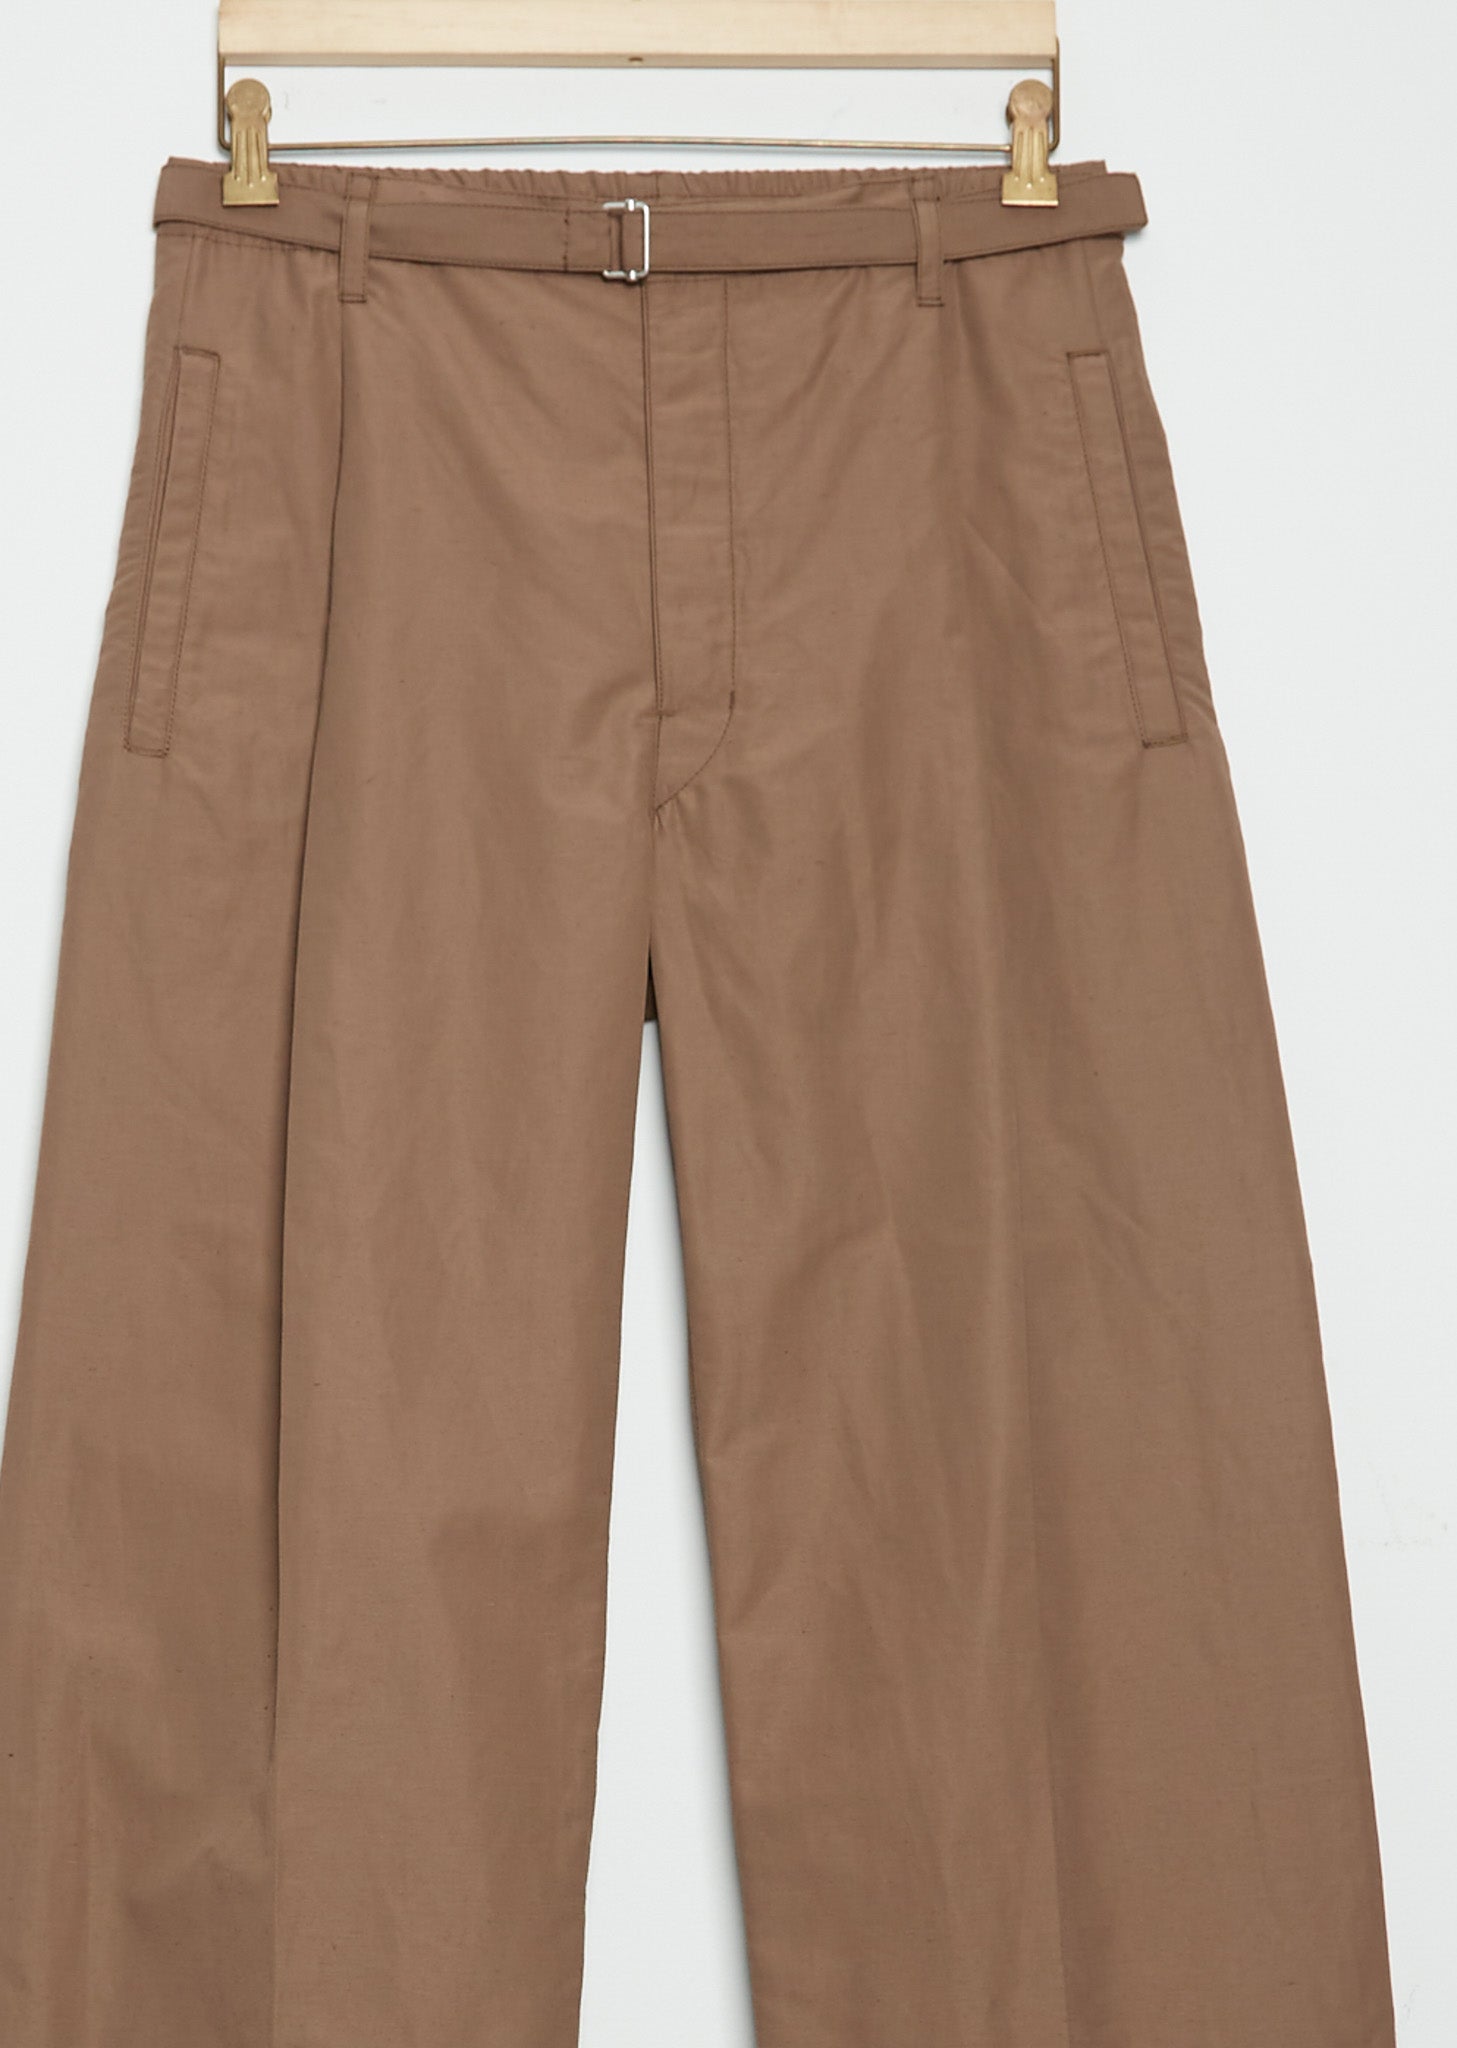 Men's Belted Easy High-Waisted Pants - 46 / BR409 Cub Brown